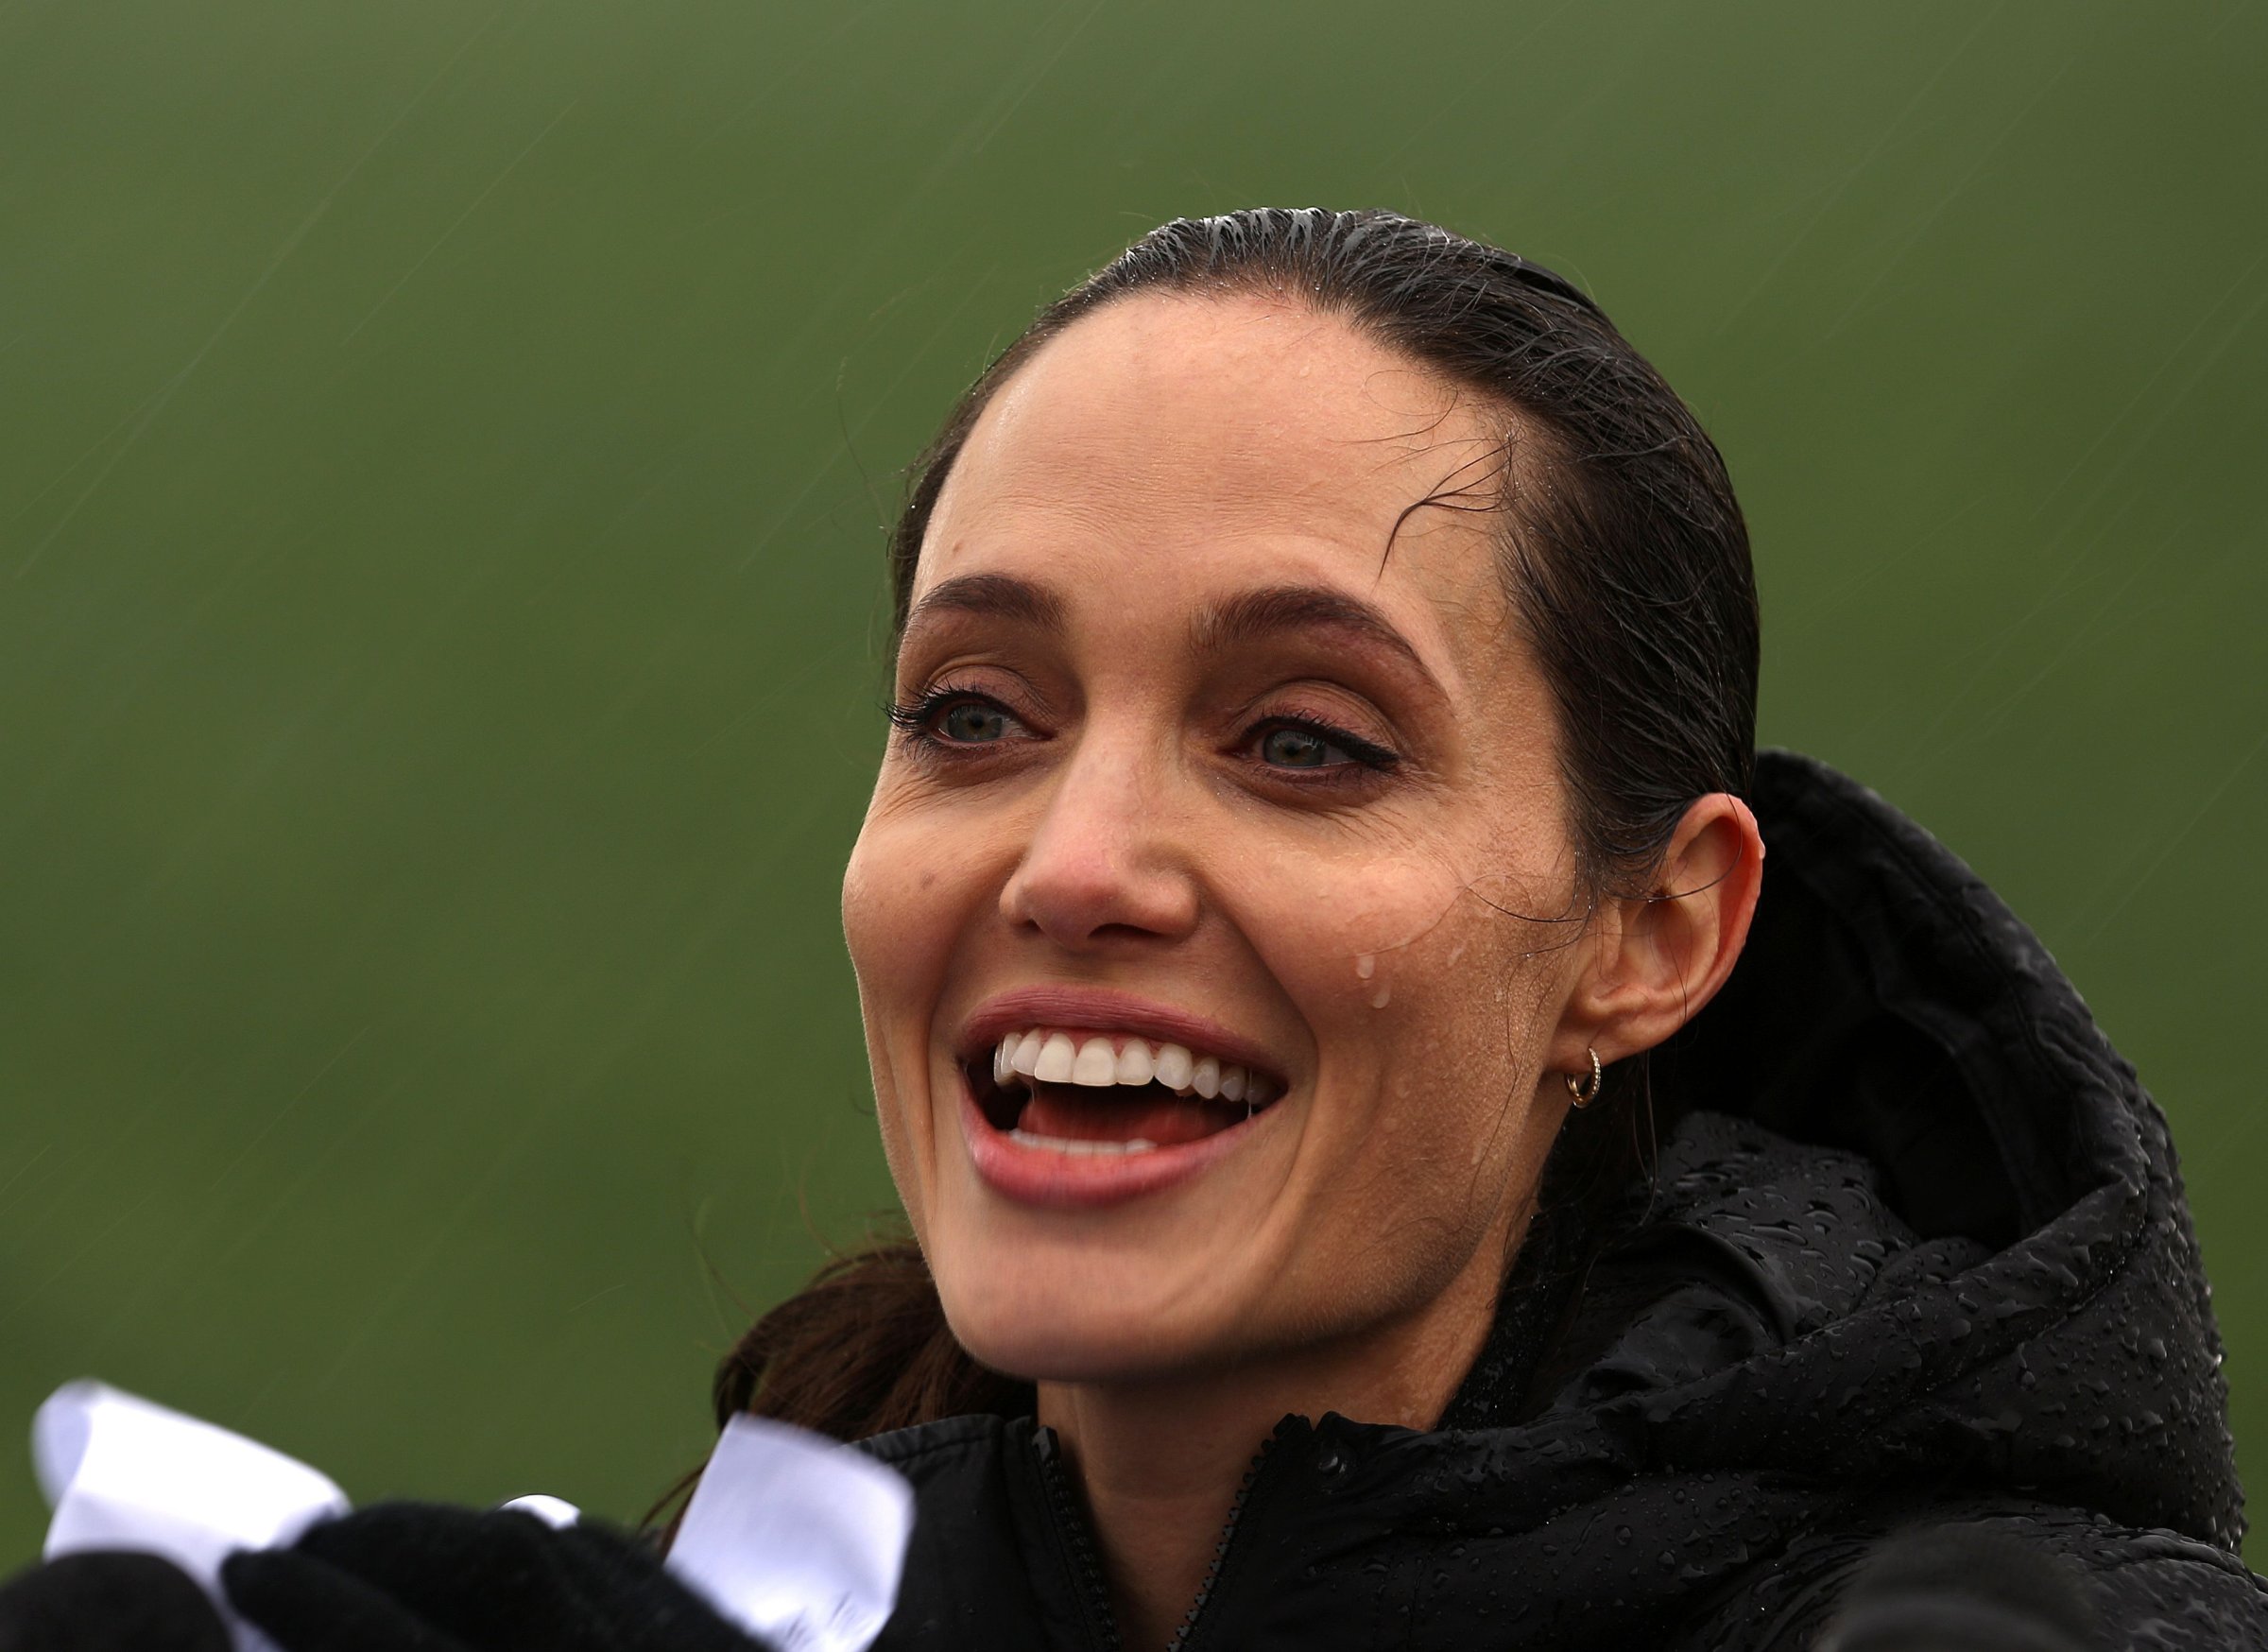 Special envoy of the UN High Commissioner for Refugees, US actress Angelina Jolie reacts during a press conference under the rain as part of her visit at a Syrian refugee camp near the city of Zahle in Lebanon's Bekaa Valley on March 15, 2016.